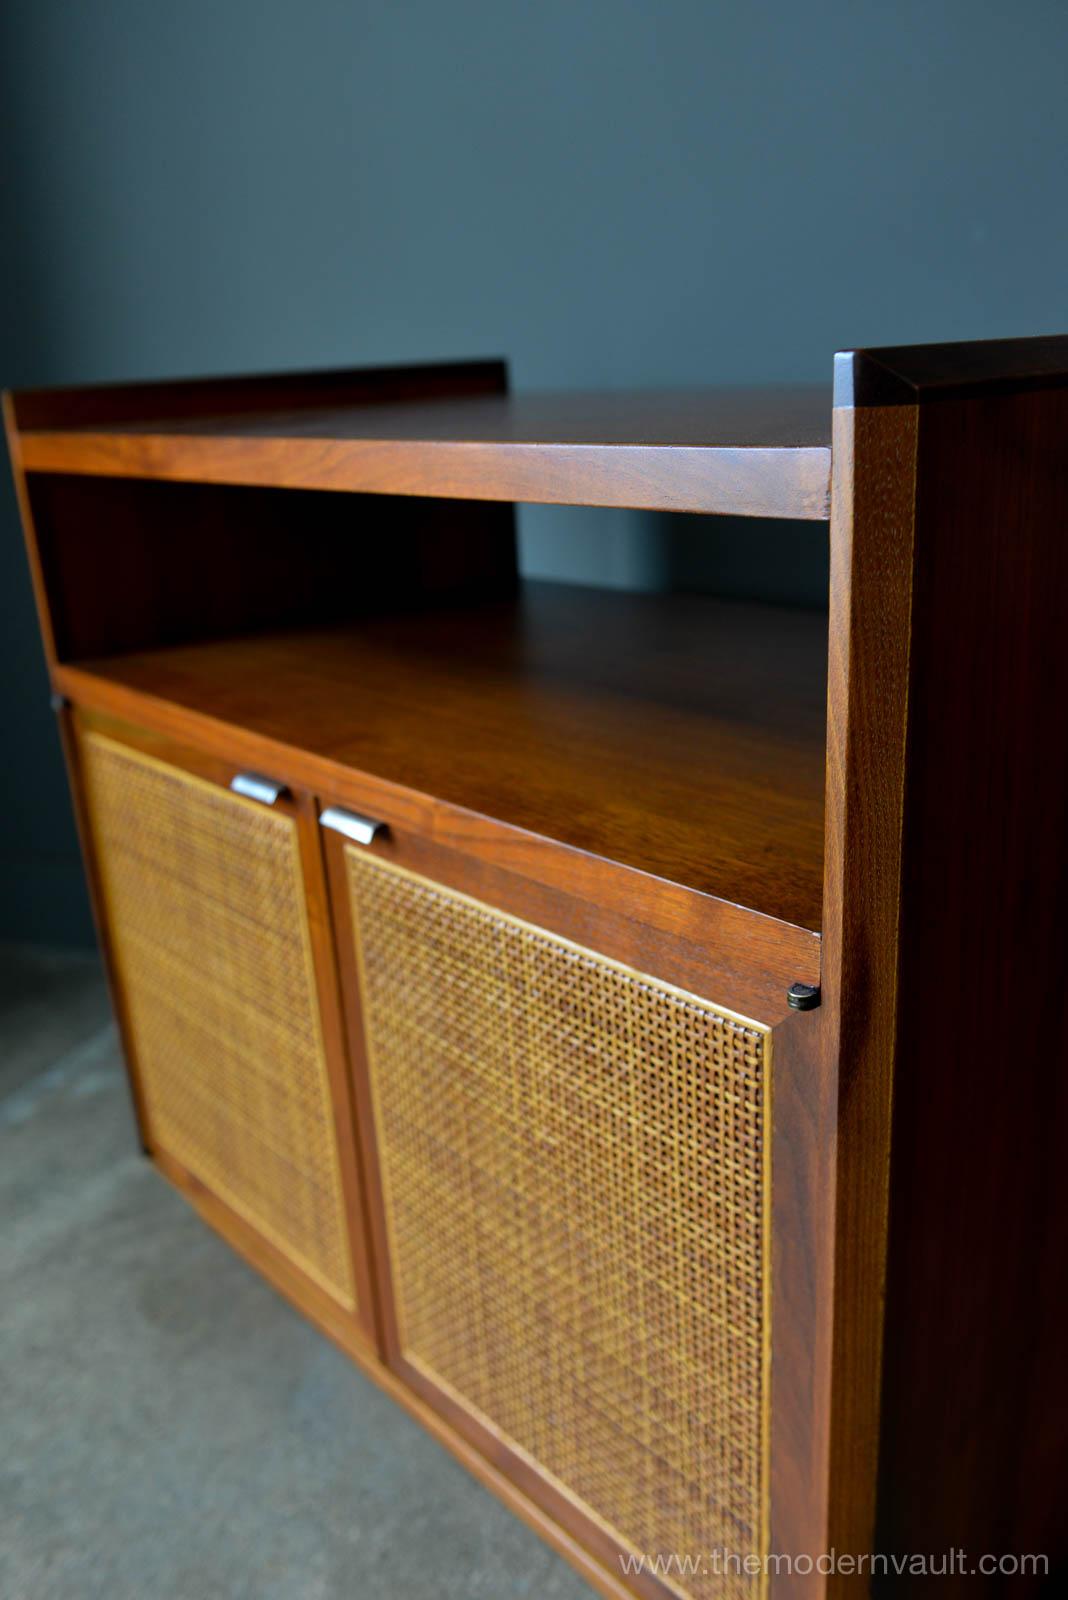 Mid-Century Modern Walnut and Cane Cabinet or Nightstand by Jack Cartwright for Founders circa 1965